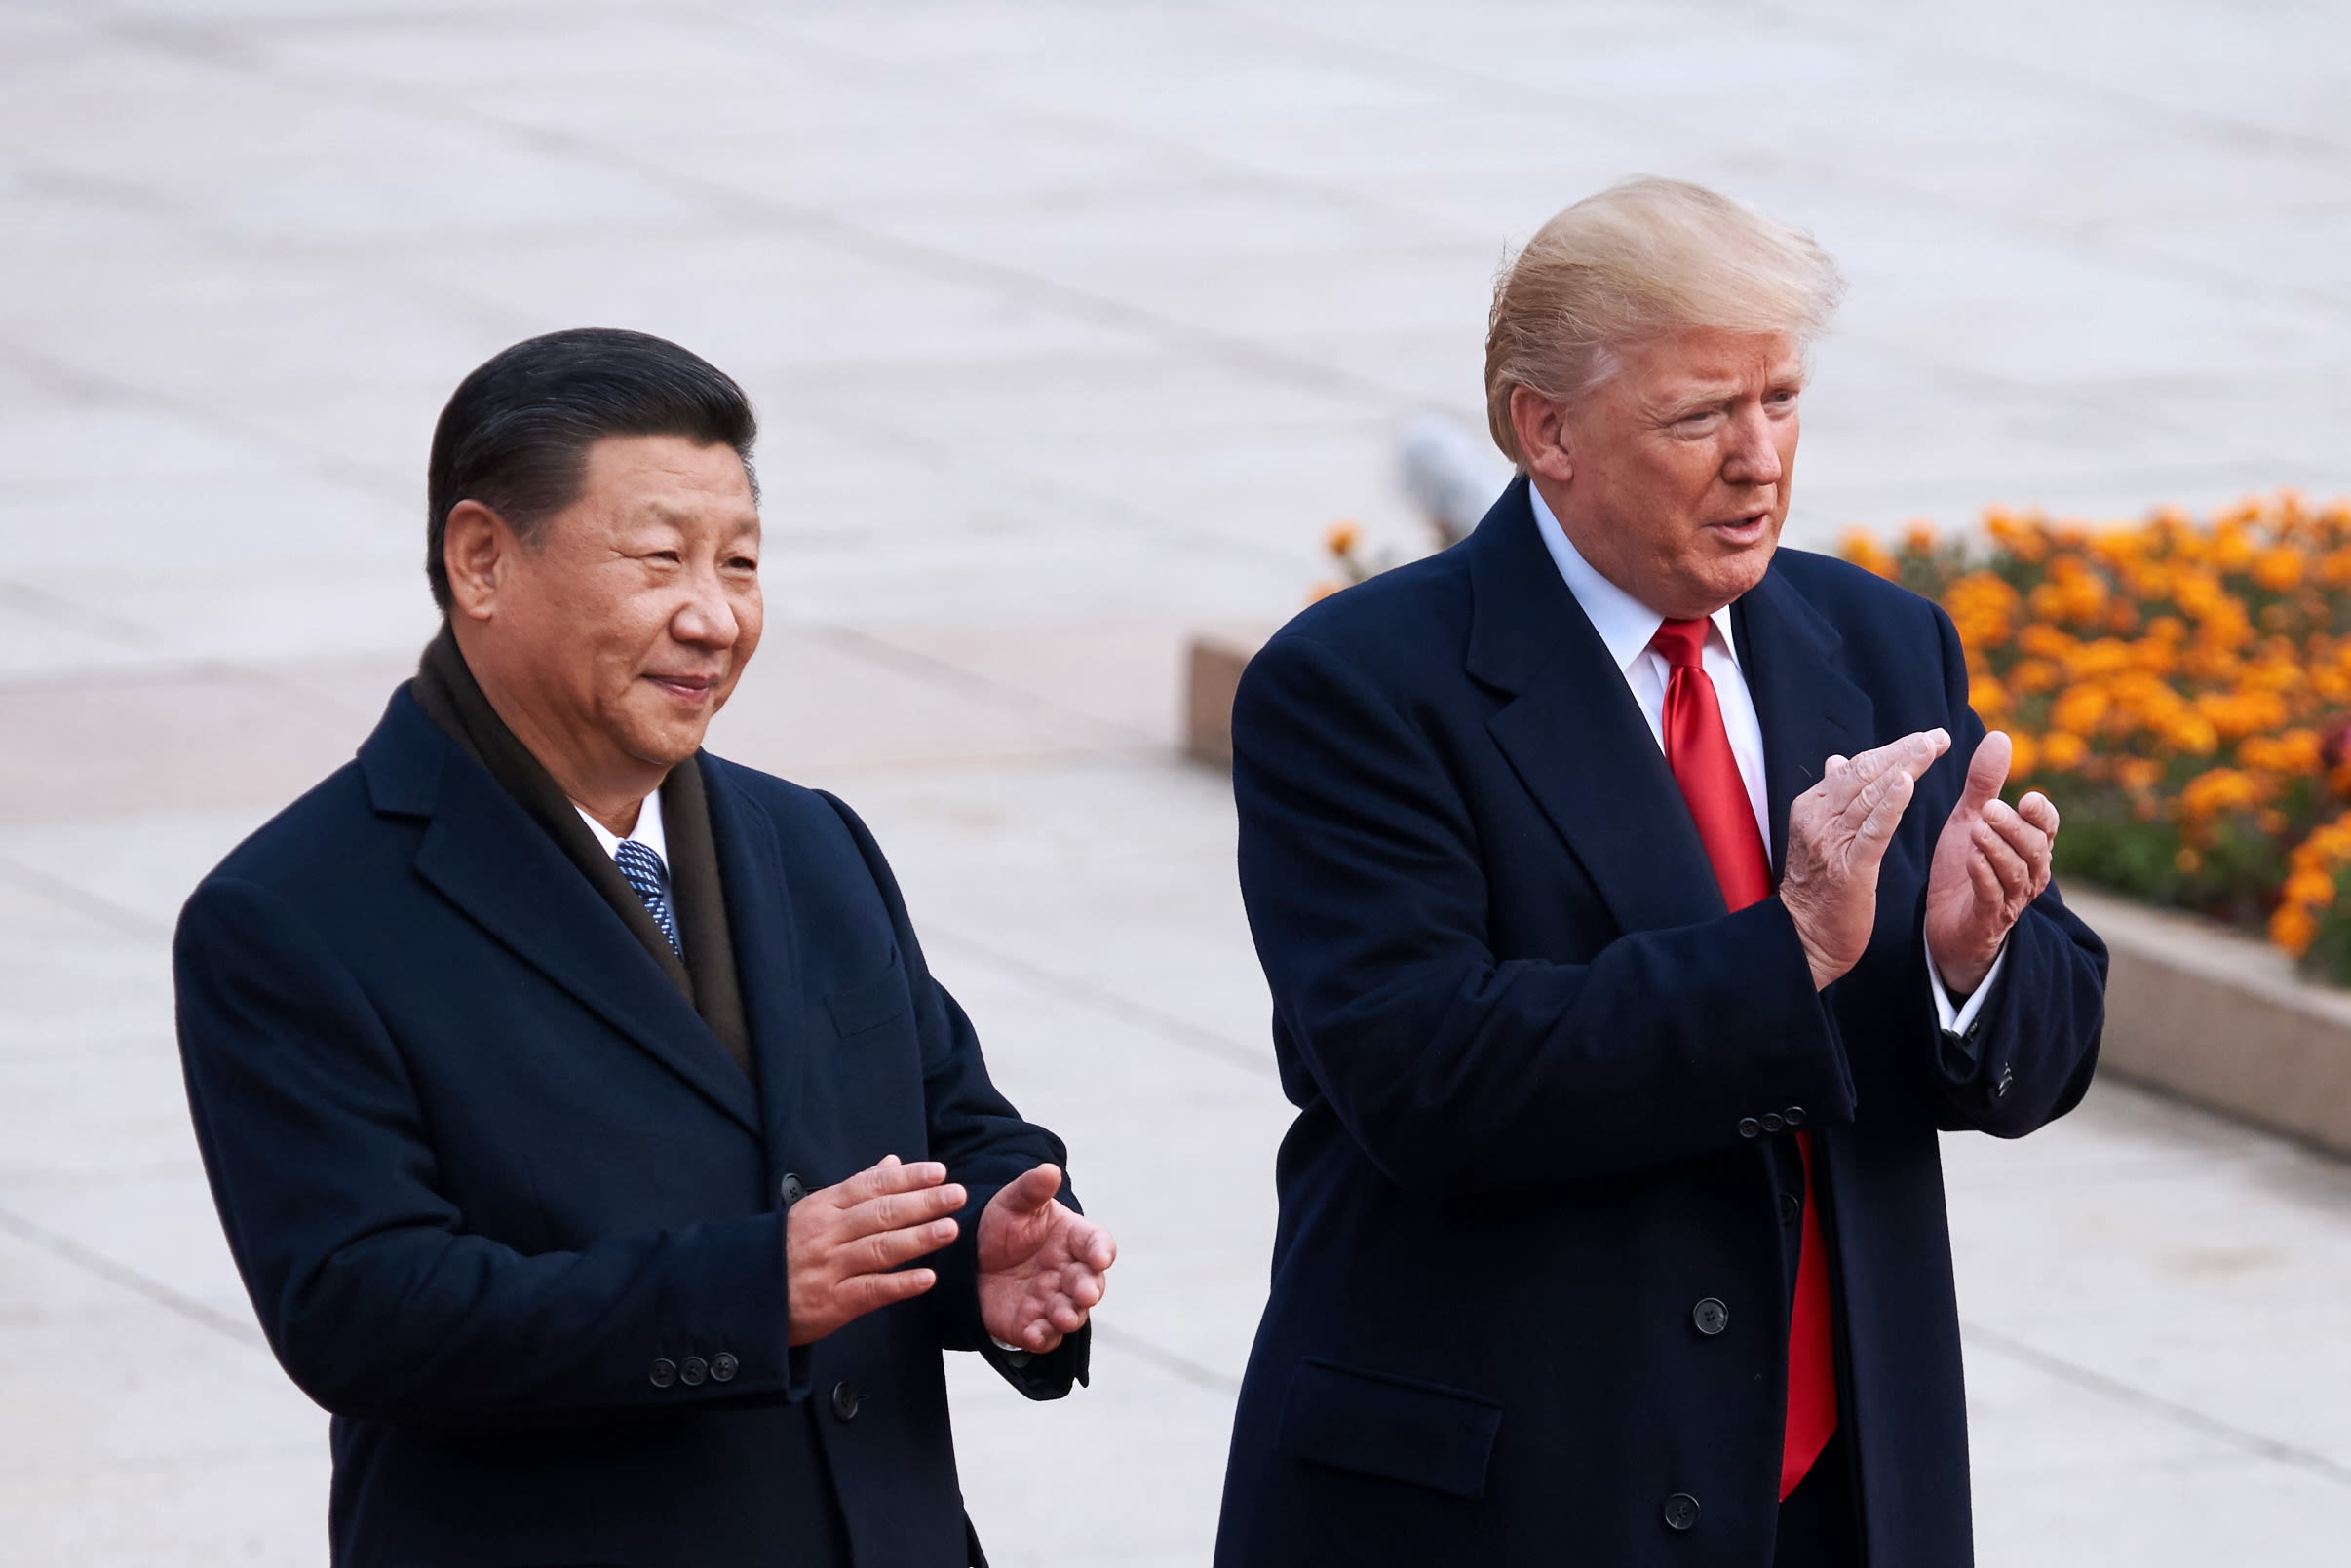 Trump says the US and China are 'working closely together' in fight against coronavirus